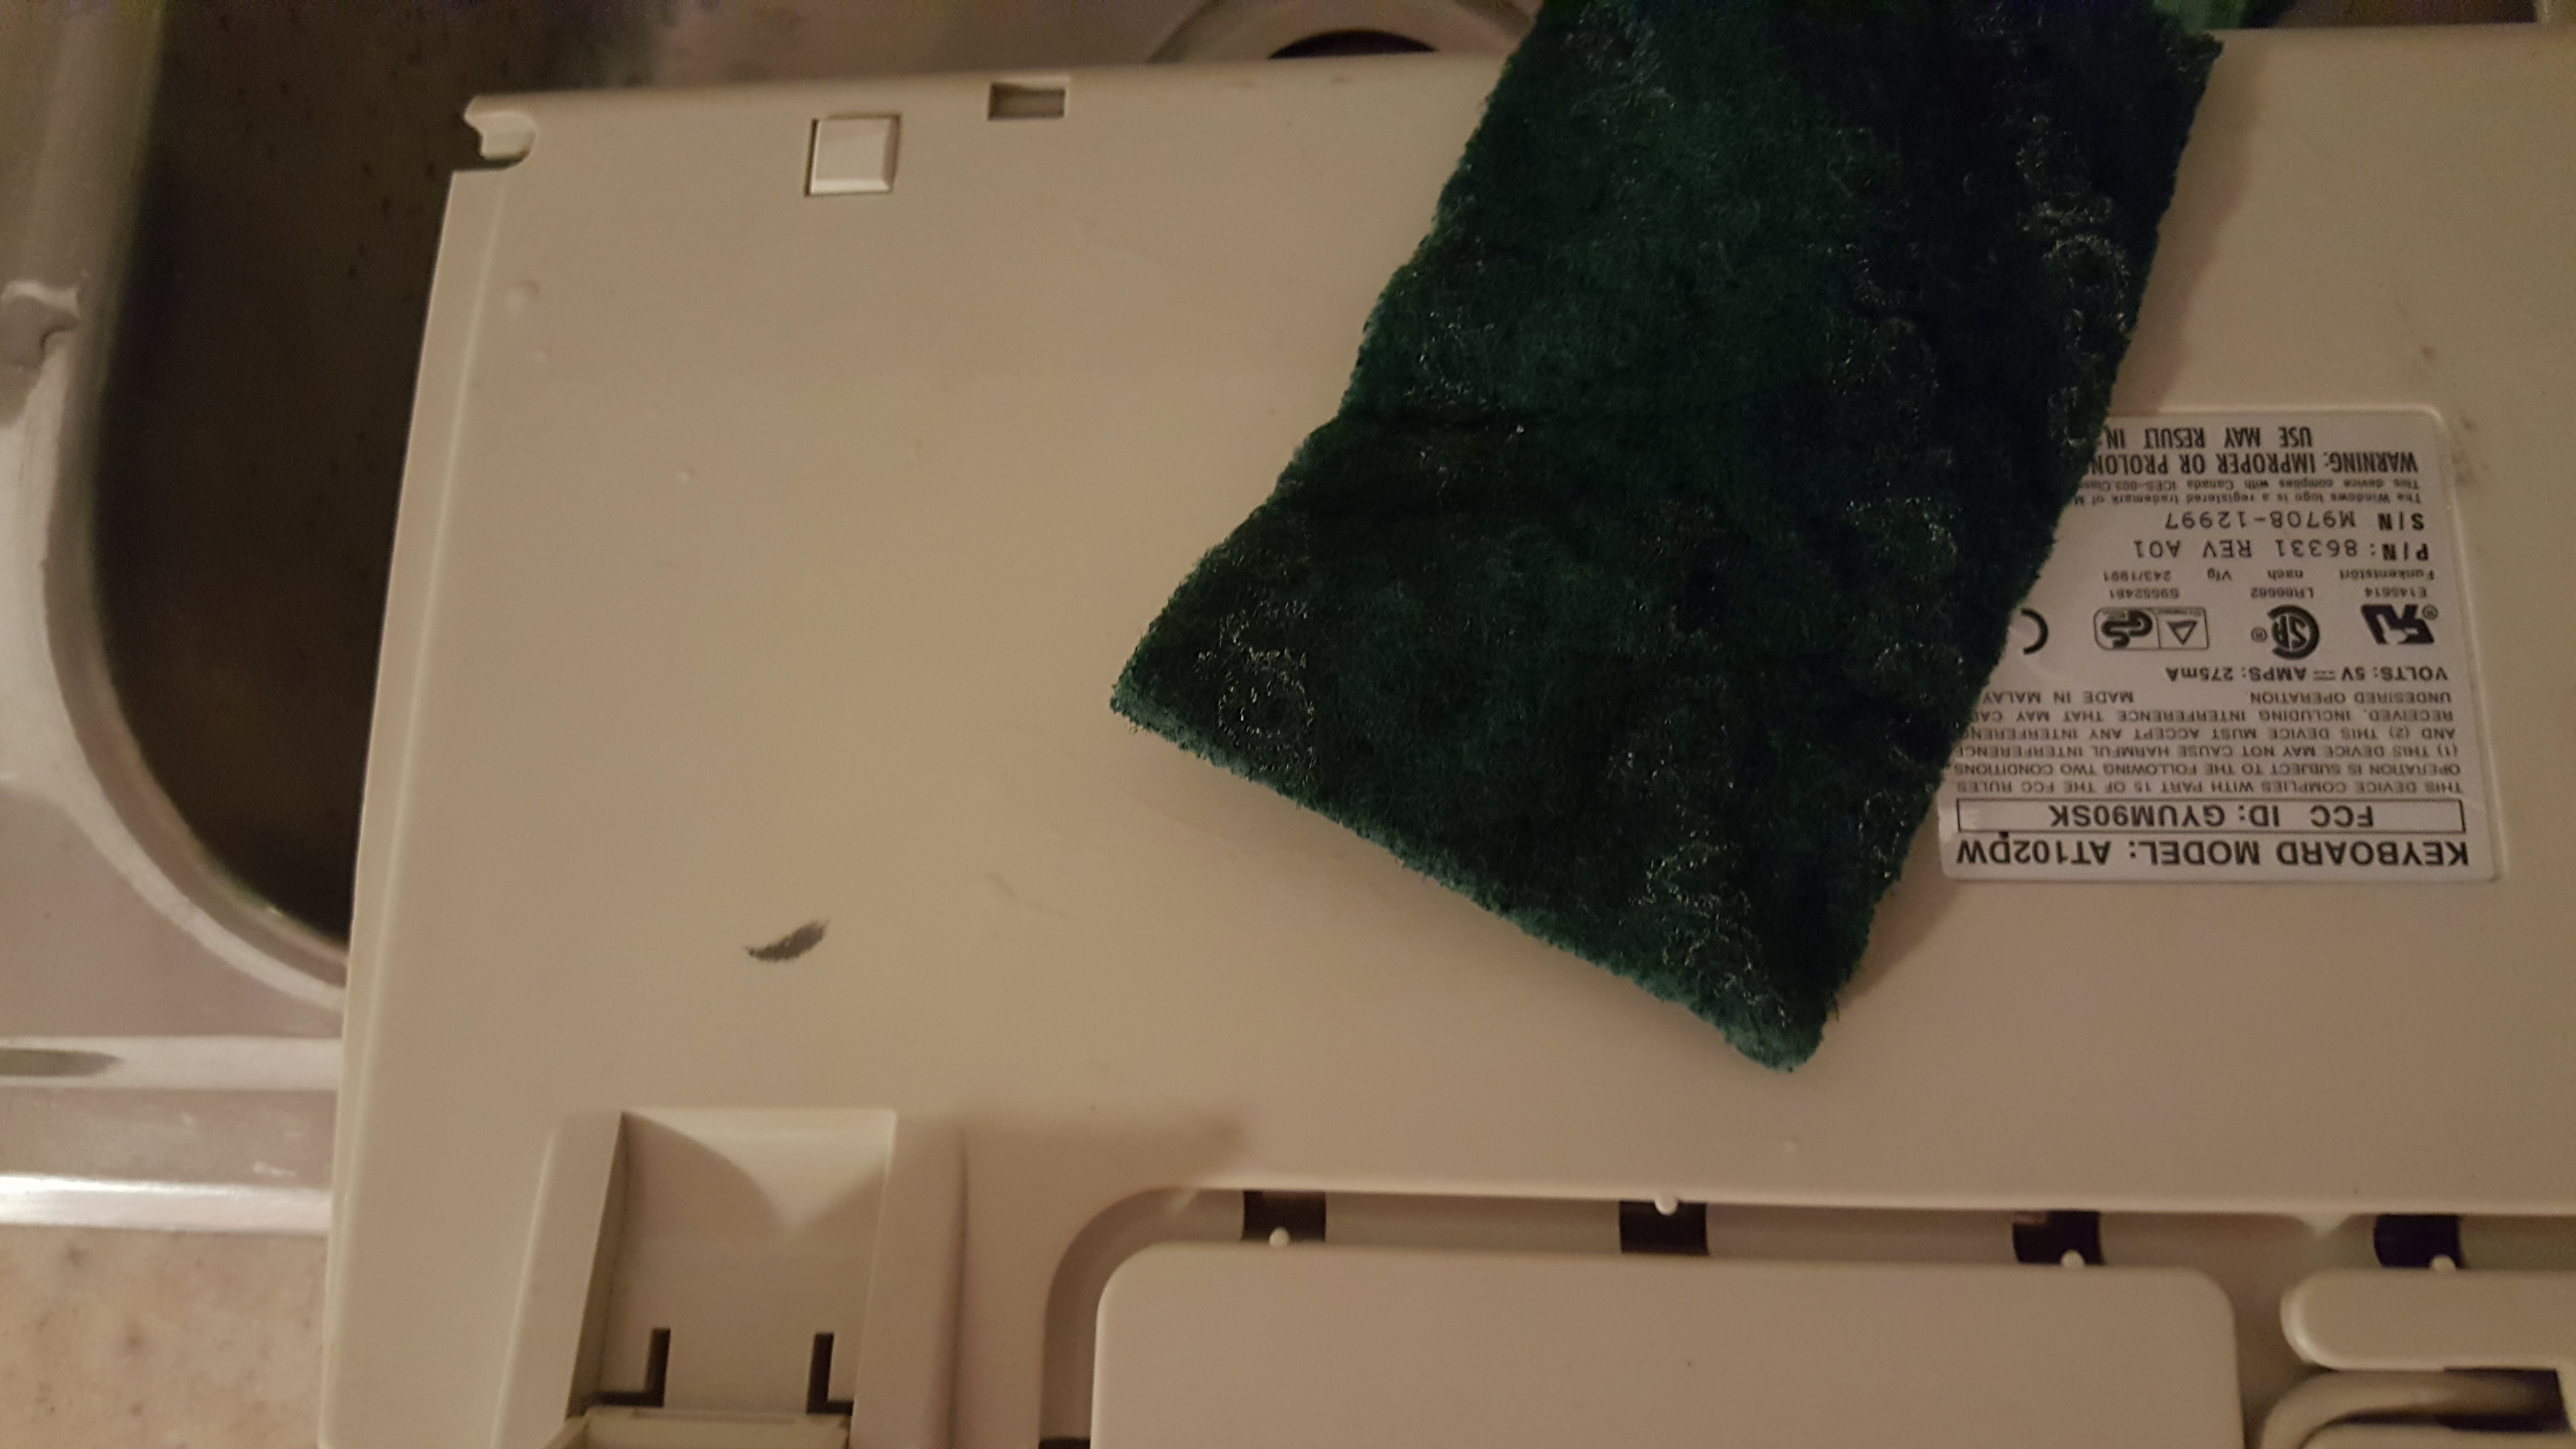 The miracle cloth - Scotch Brite scouring pad. Just be careful - it is basically like using fine grit sandpaper...so don't use it on painted cases or anything that's not already dull. Works great on these plain beige cases though! I also used it to remove all the shine from the ABS spacebar :)